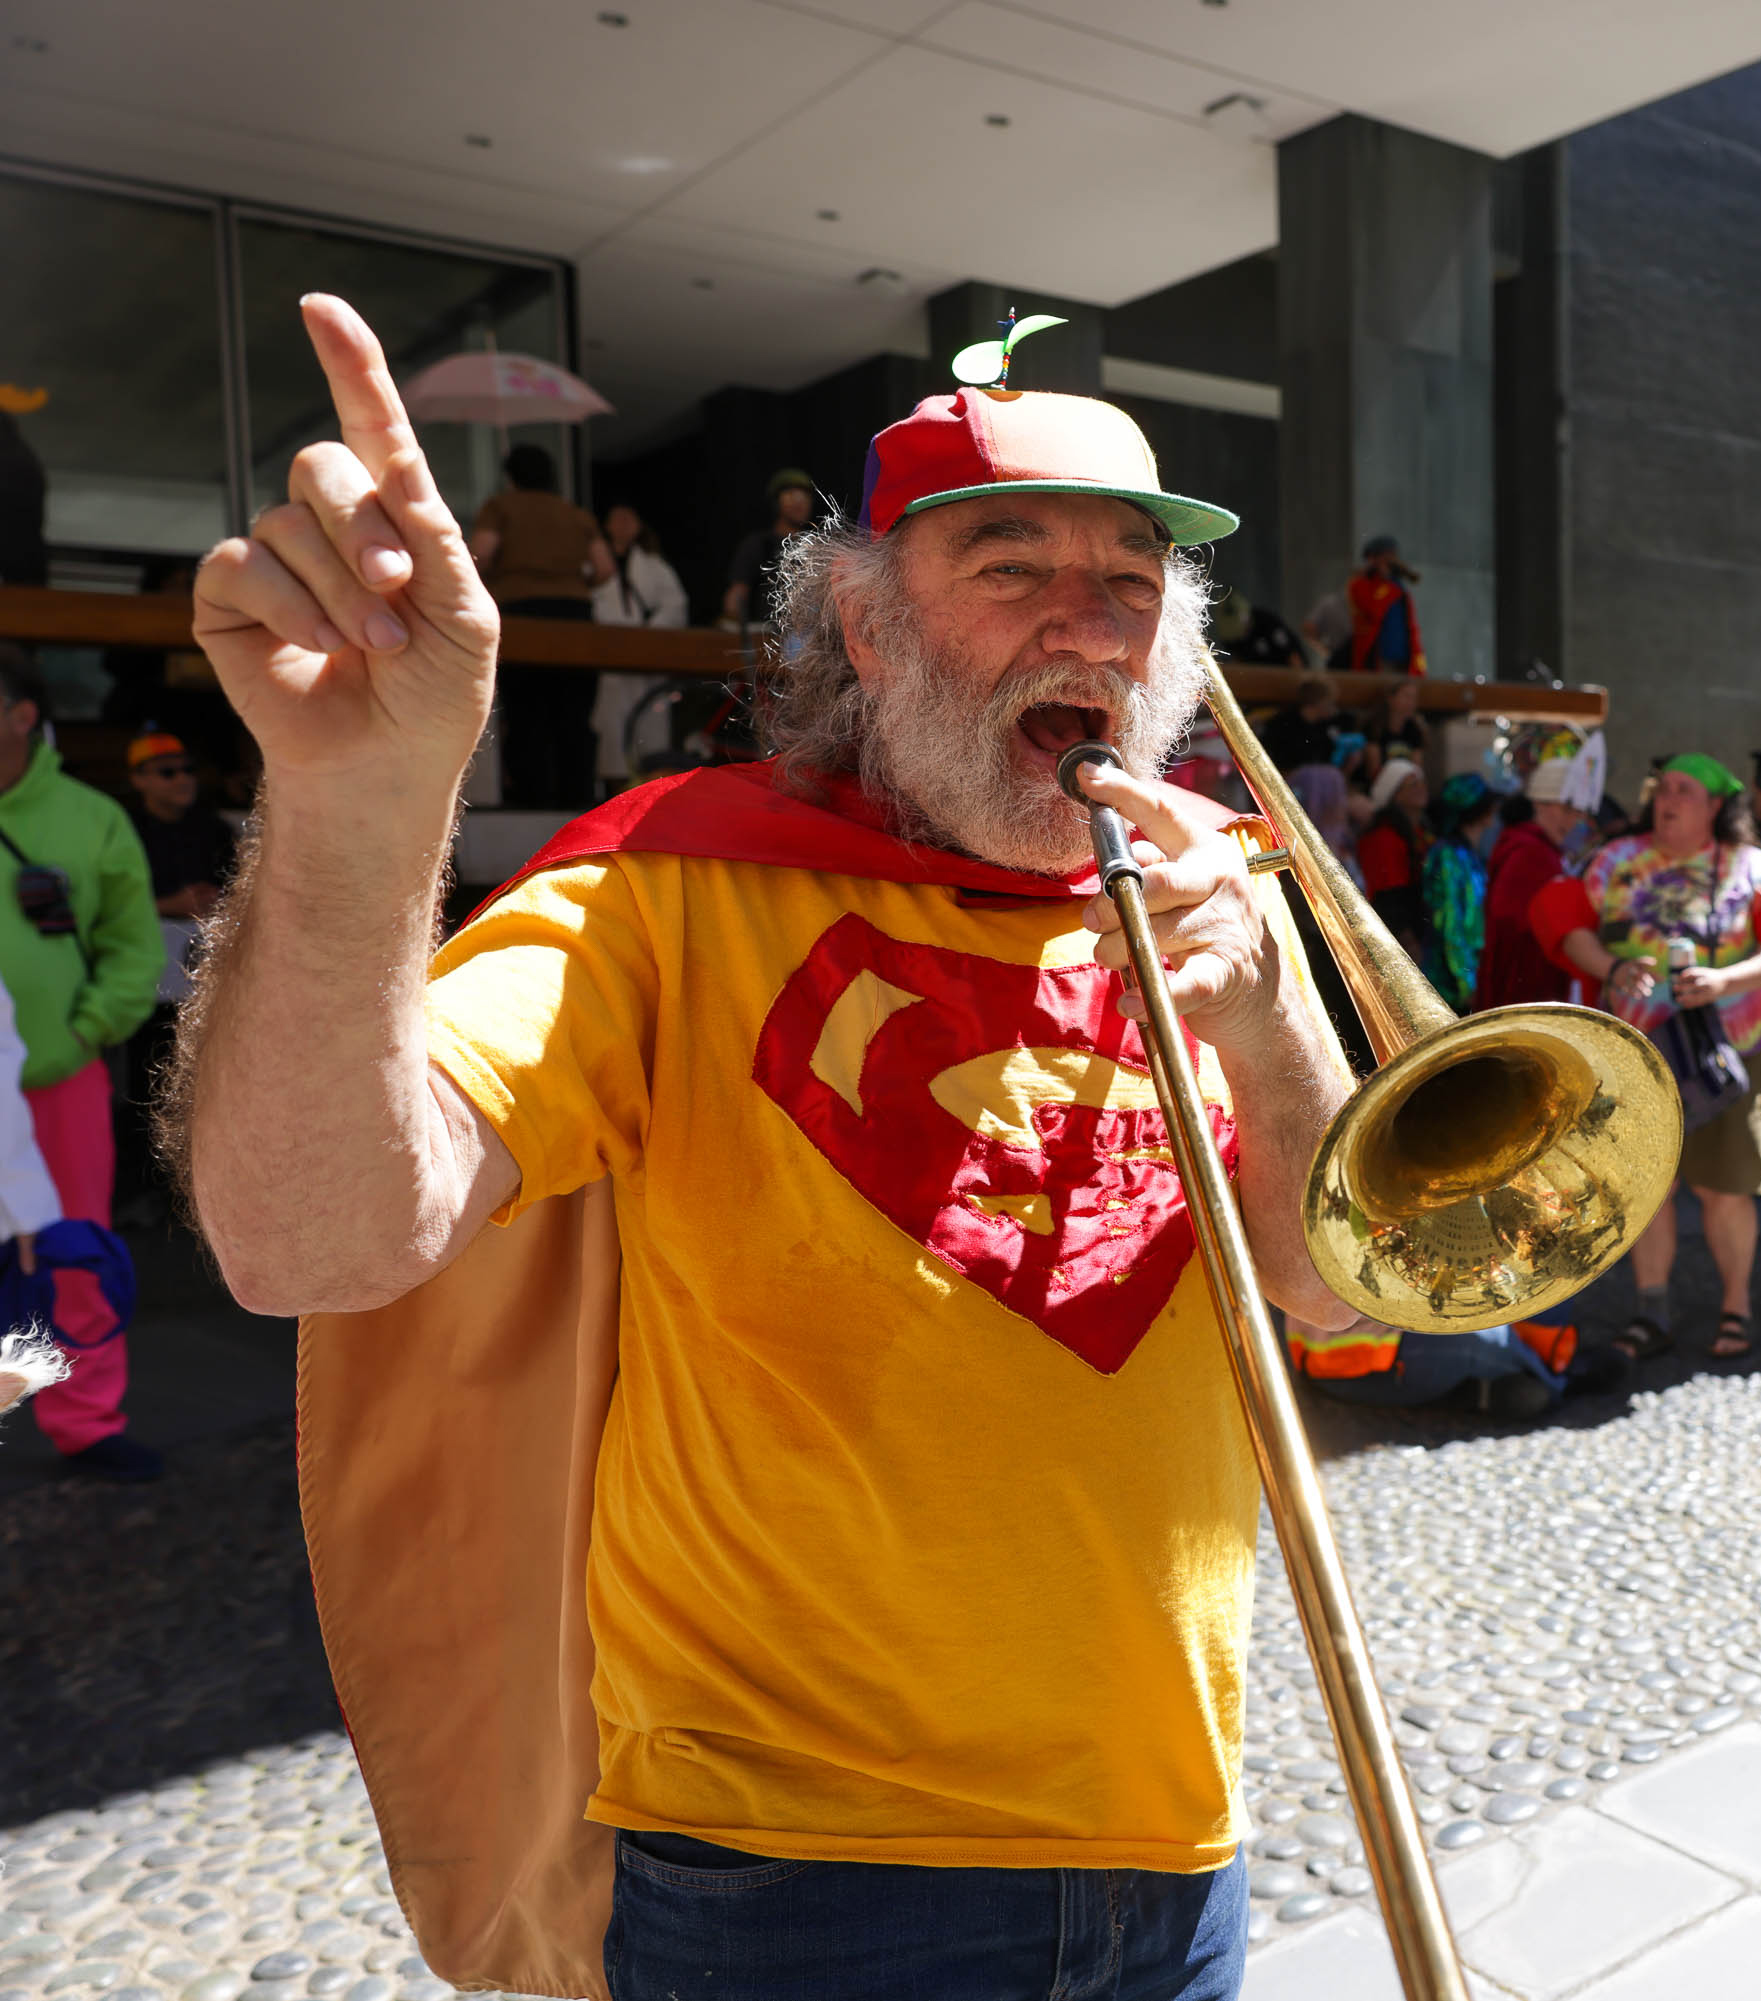 A man in a Superman shirt and hat plays a trombone, pointing skyward, at an outdoor event.